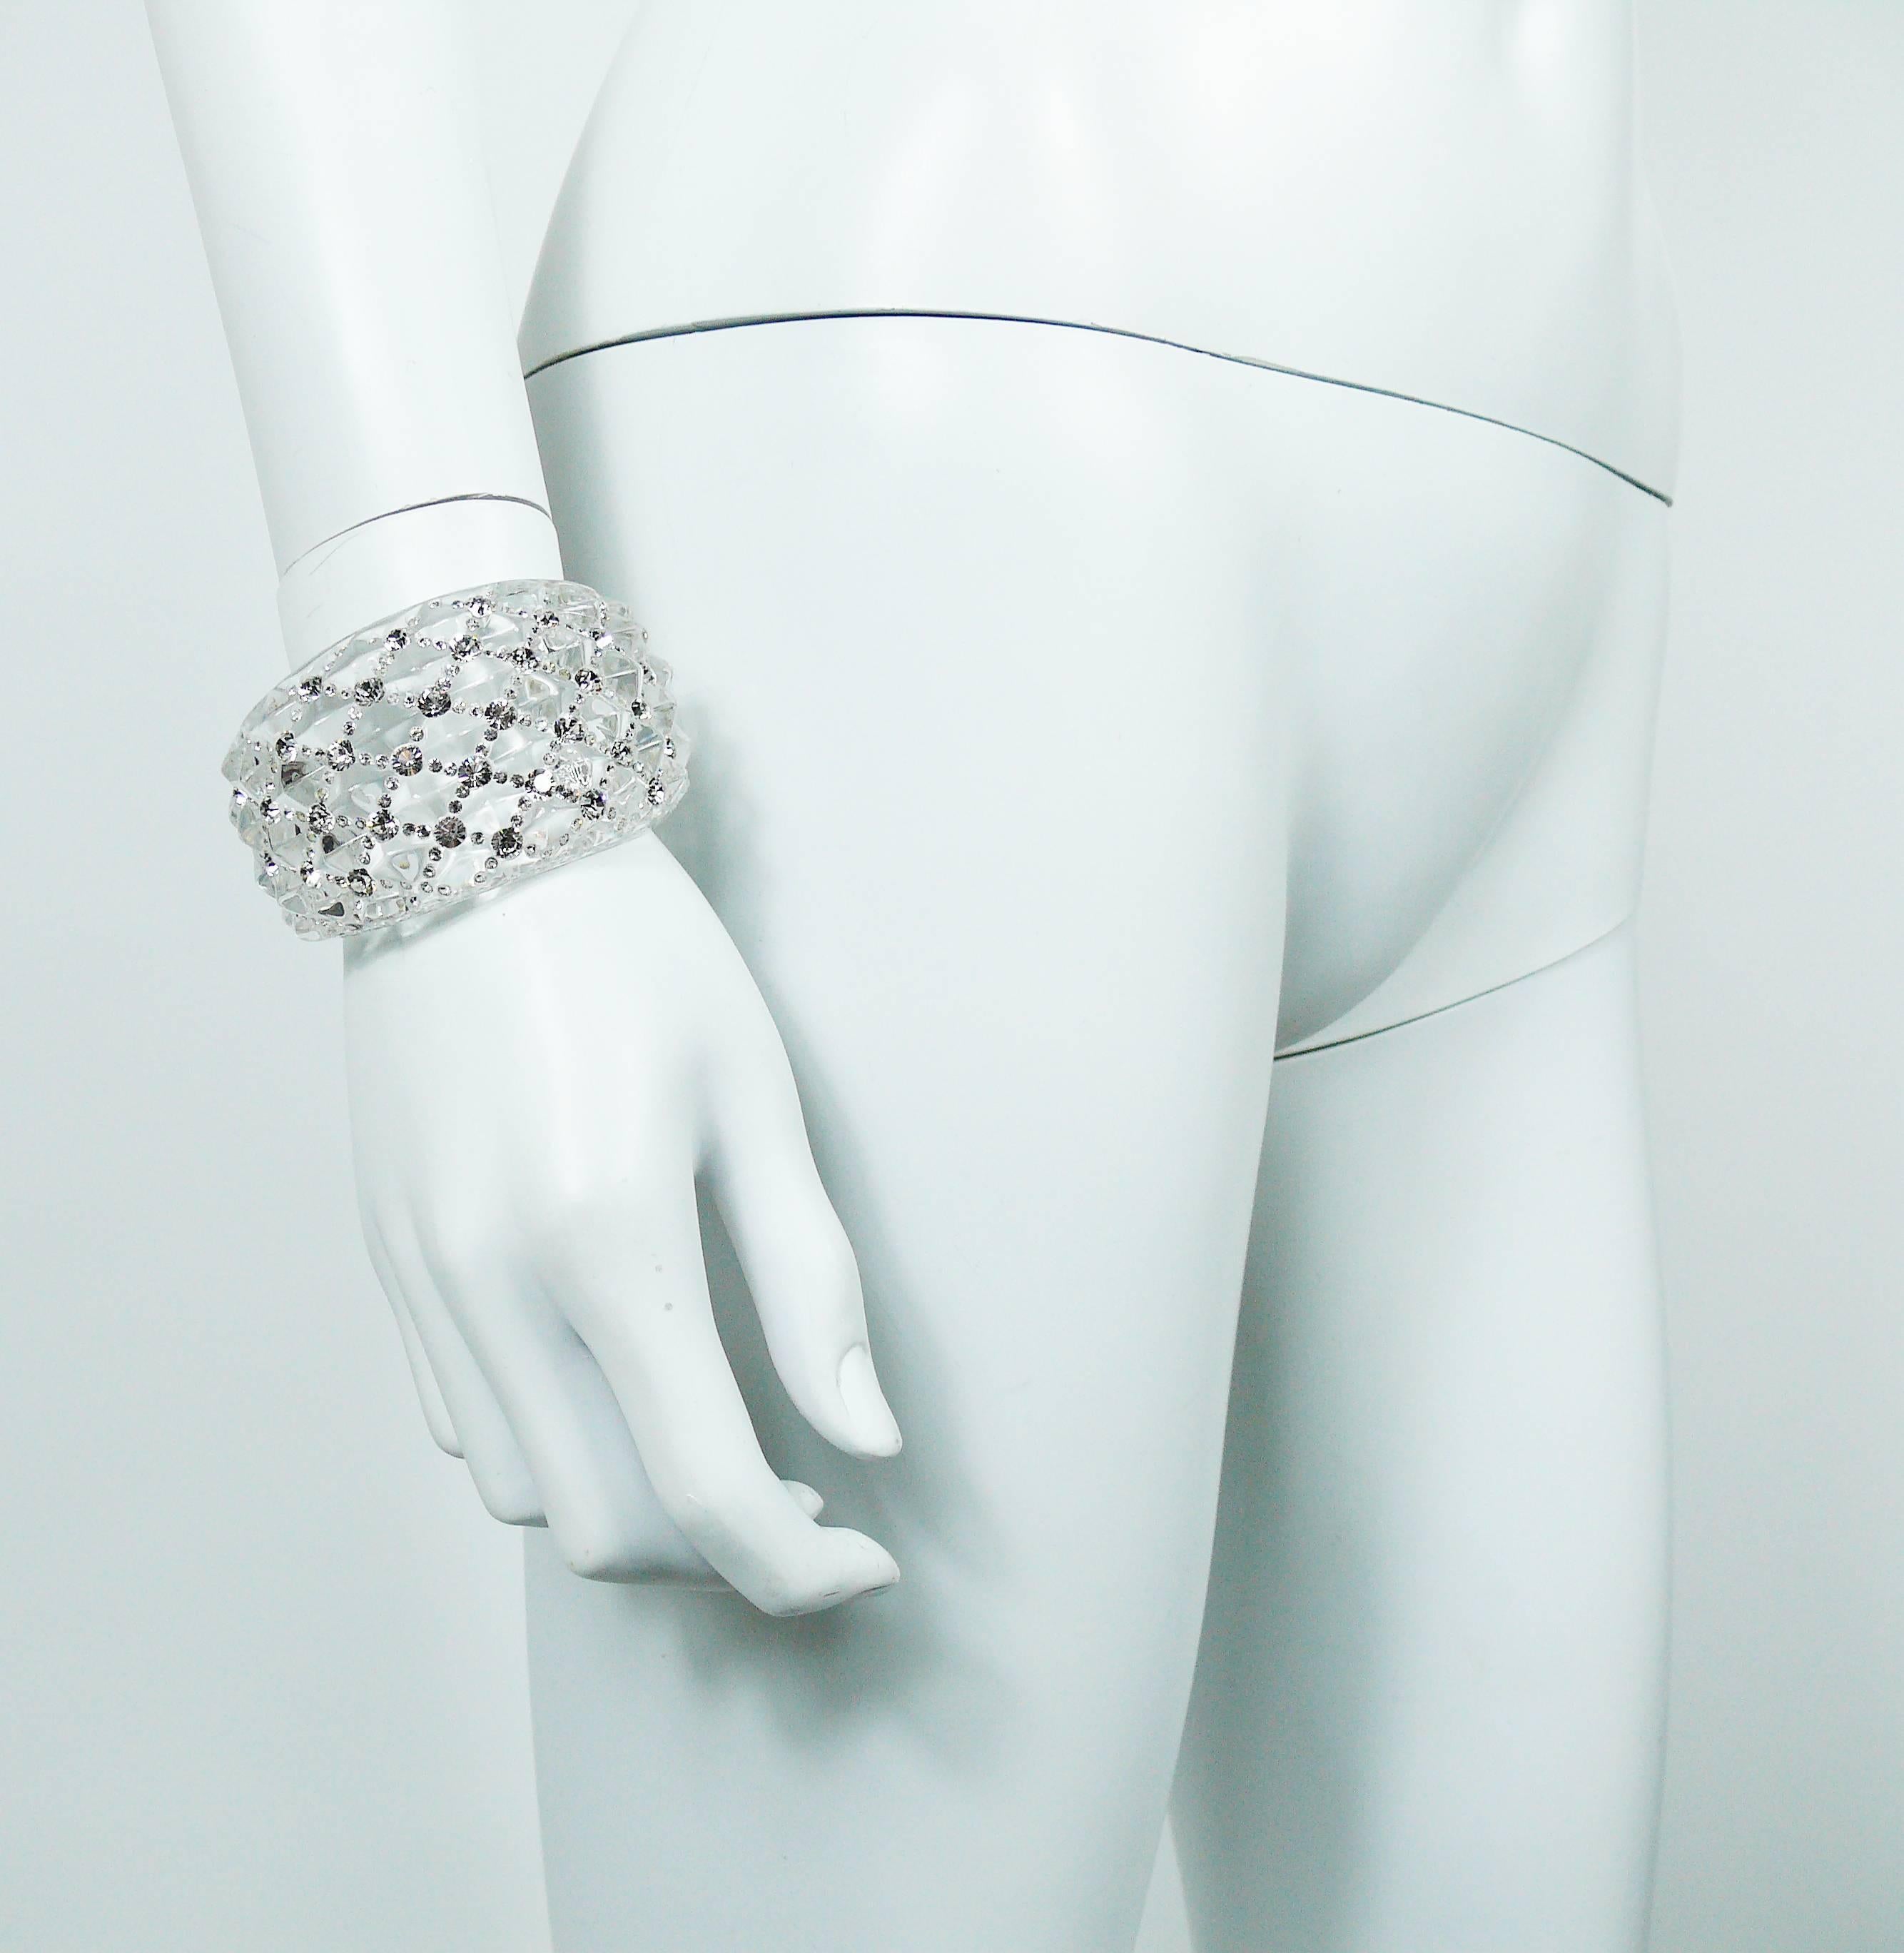 CHRISTIAN DIOR lucite cuff bracelet featuring a quilted design with SWAROVSKI clear crystal embellishement.

Embossed DIOR.

Indicative measurements : inner length approx. 5.5 cm (2.17 inches) / inner width approx. 5 cm (1.97 inches) / max. width